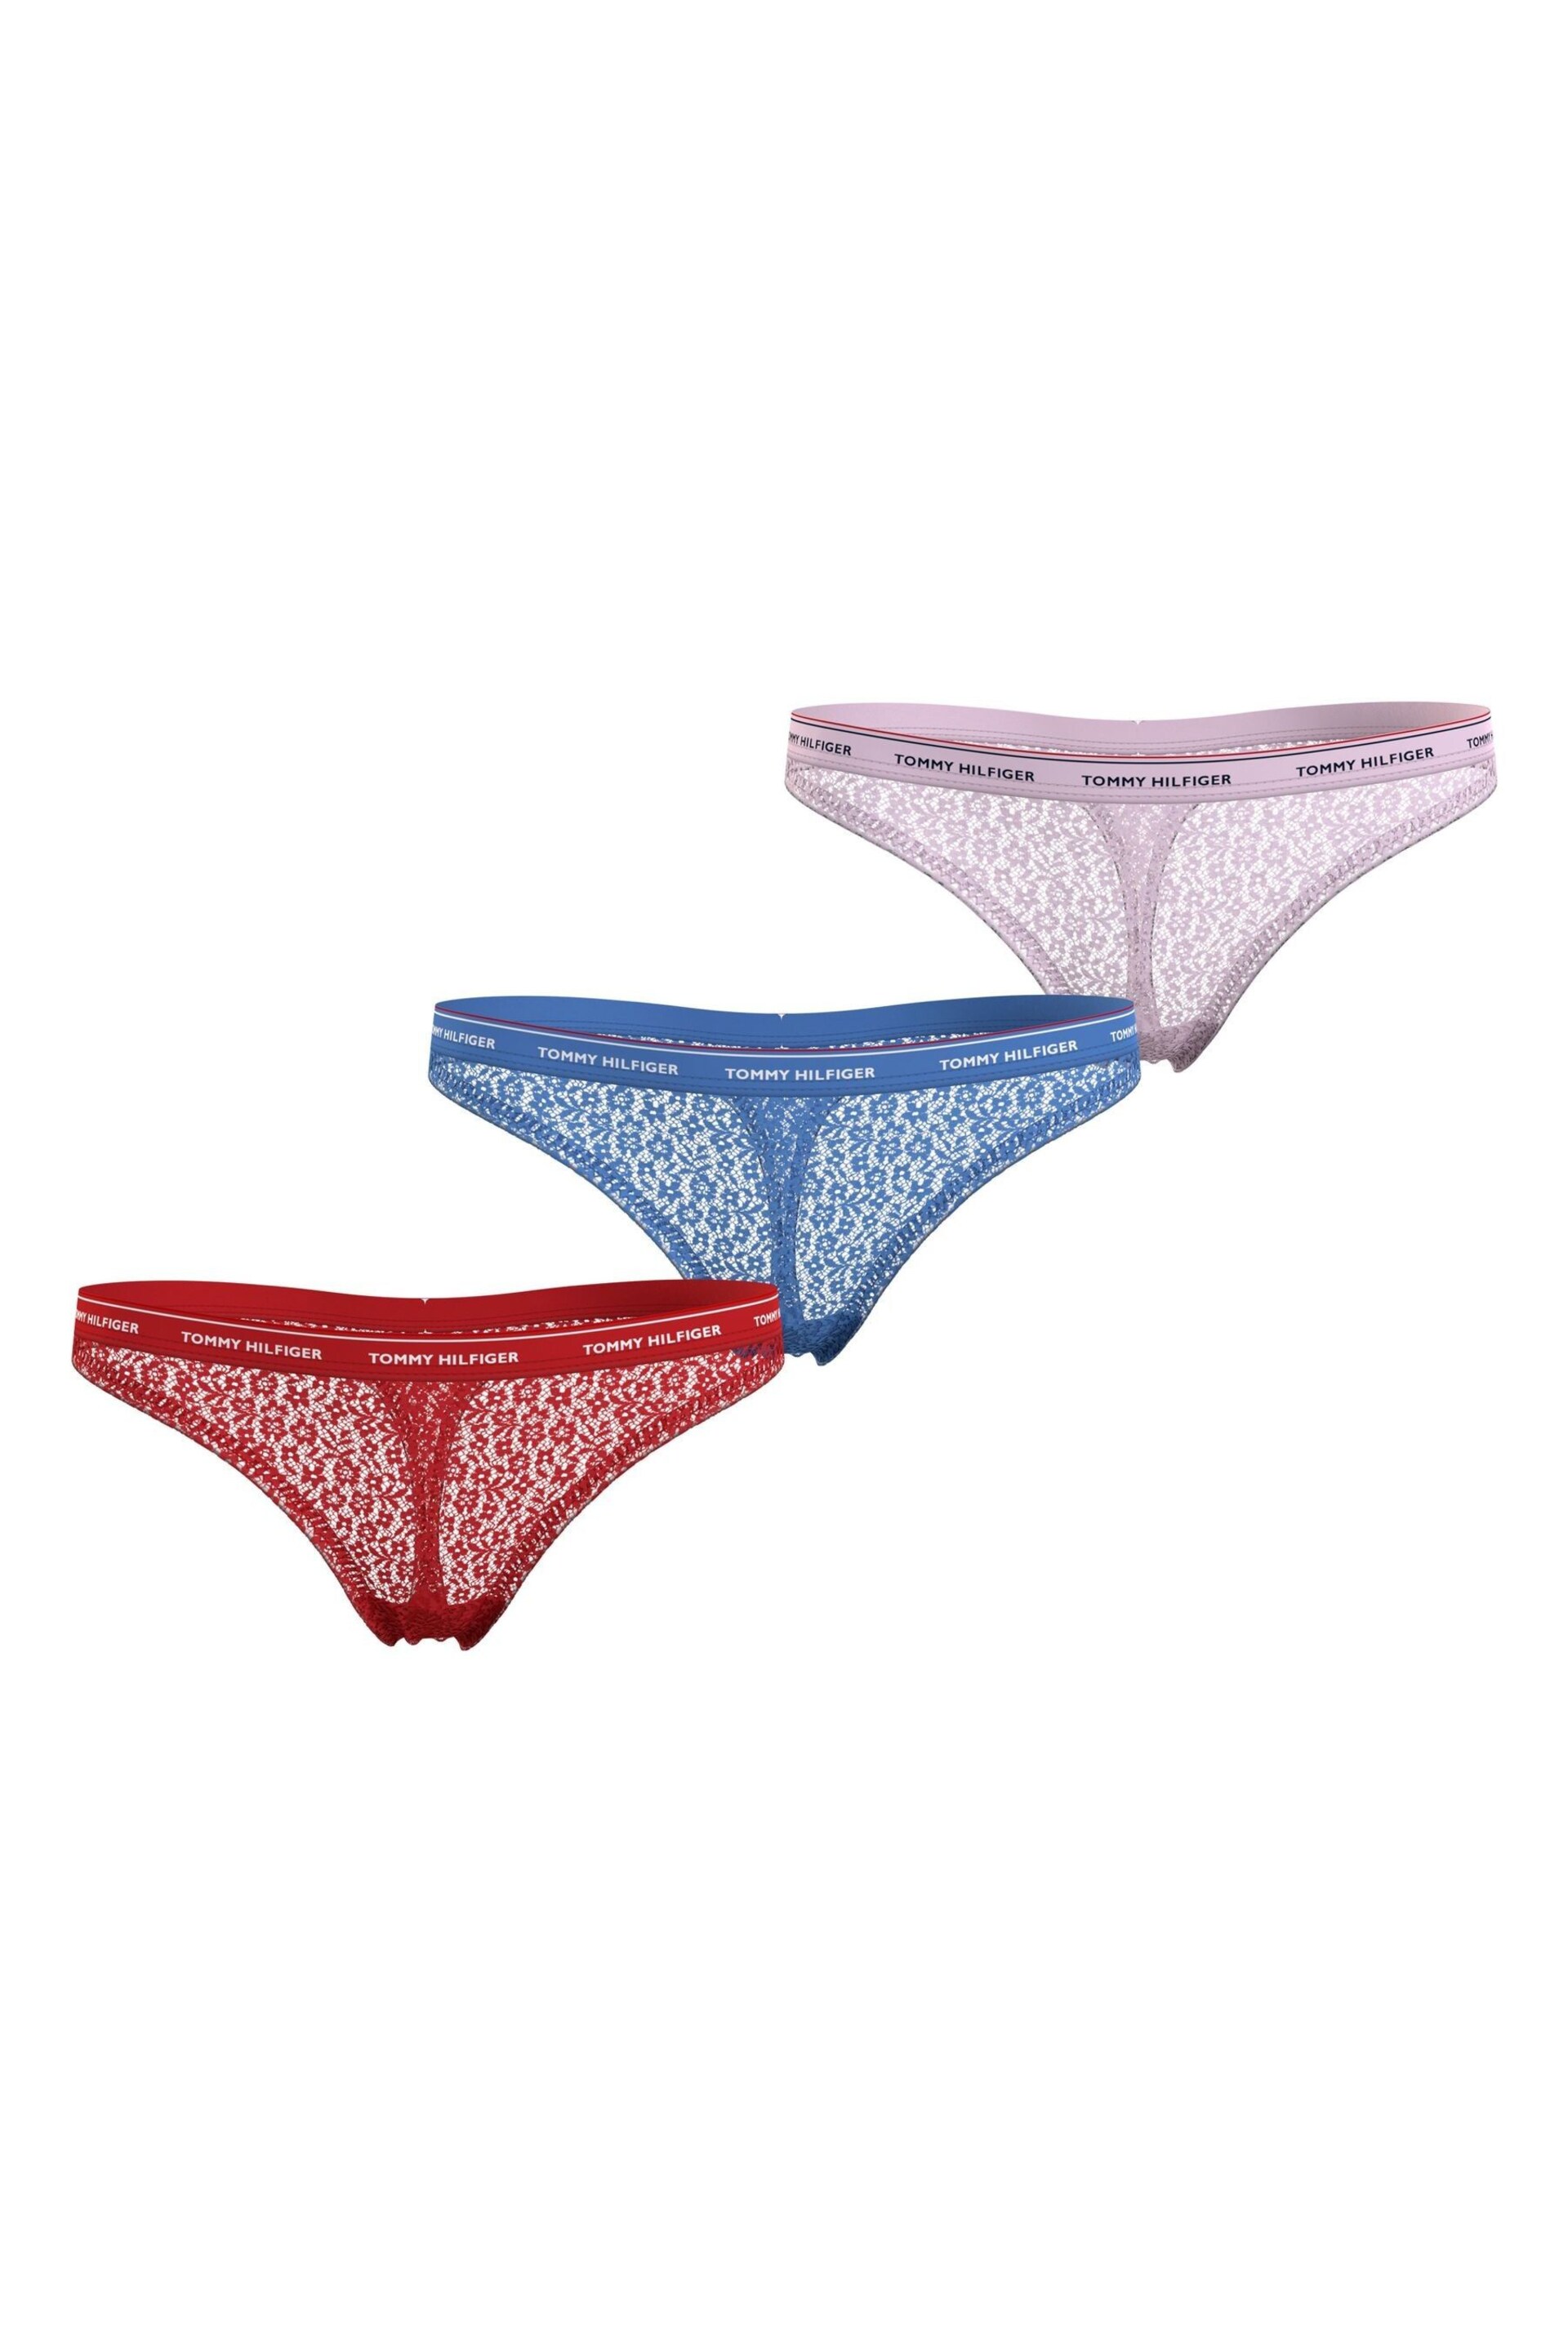 Tommy Hilfiger Red Lace Thongs 3 Pack - Image 1 of 5